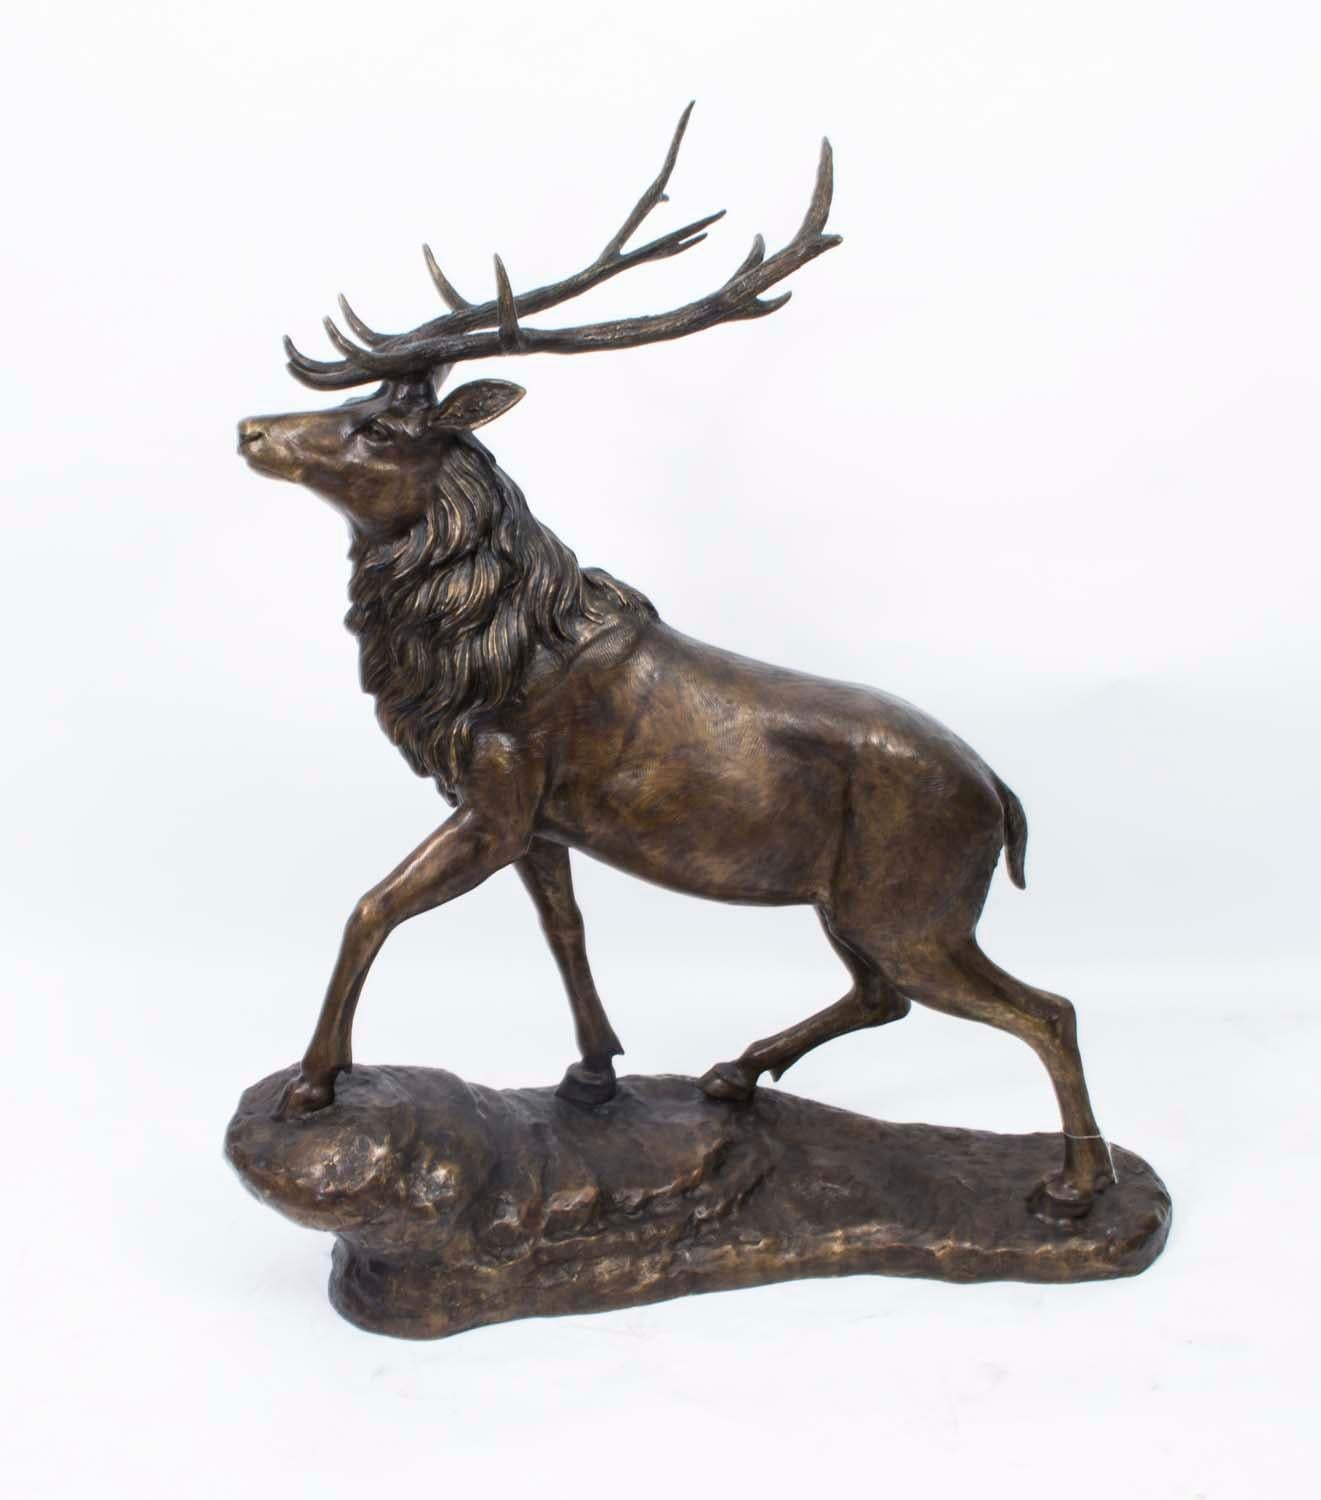 This is a very lifelike monumental bronze sculpture of a proud stag, standing on a mountain sloped base, dating from the second half of the 20th century.

He has a dark brown patina and there is no mistaking the unique design and quality of this